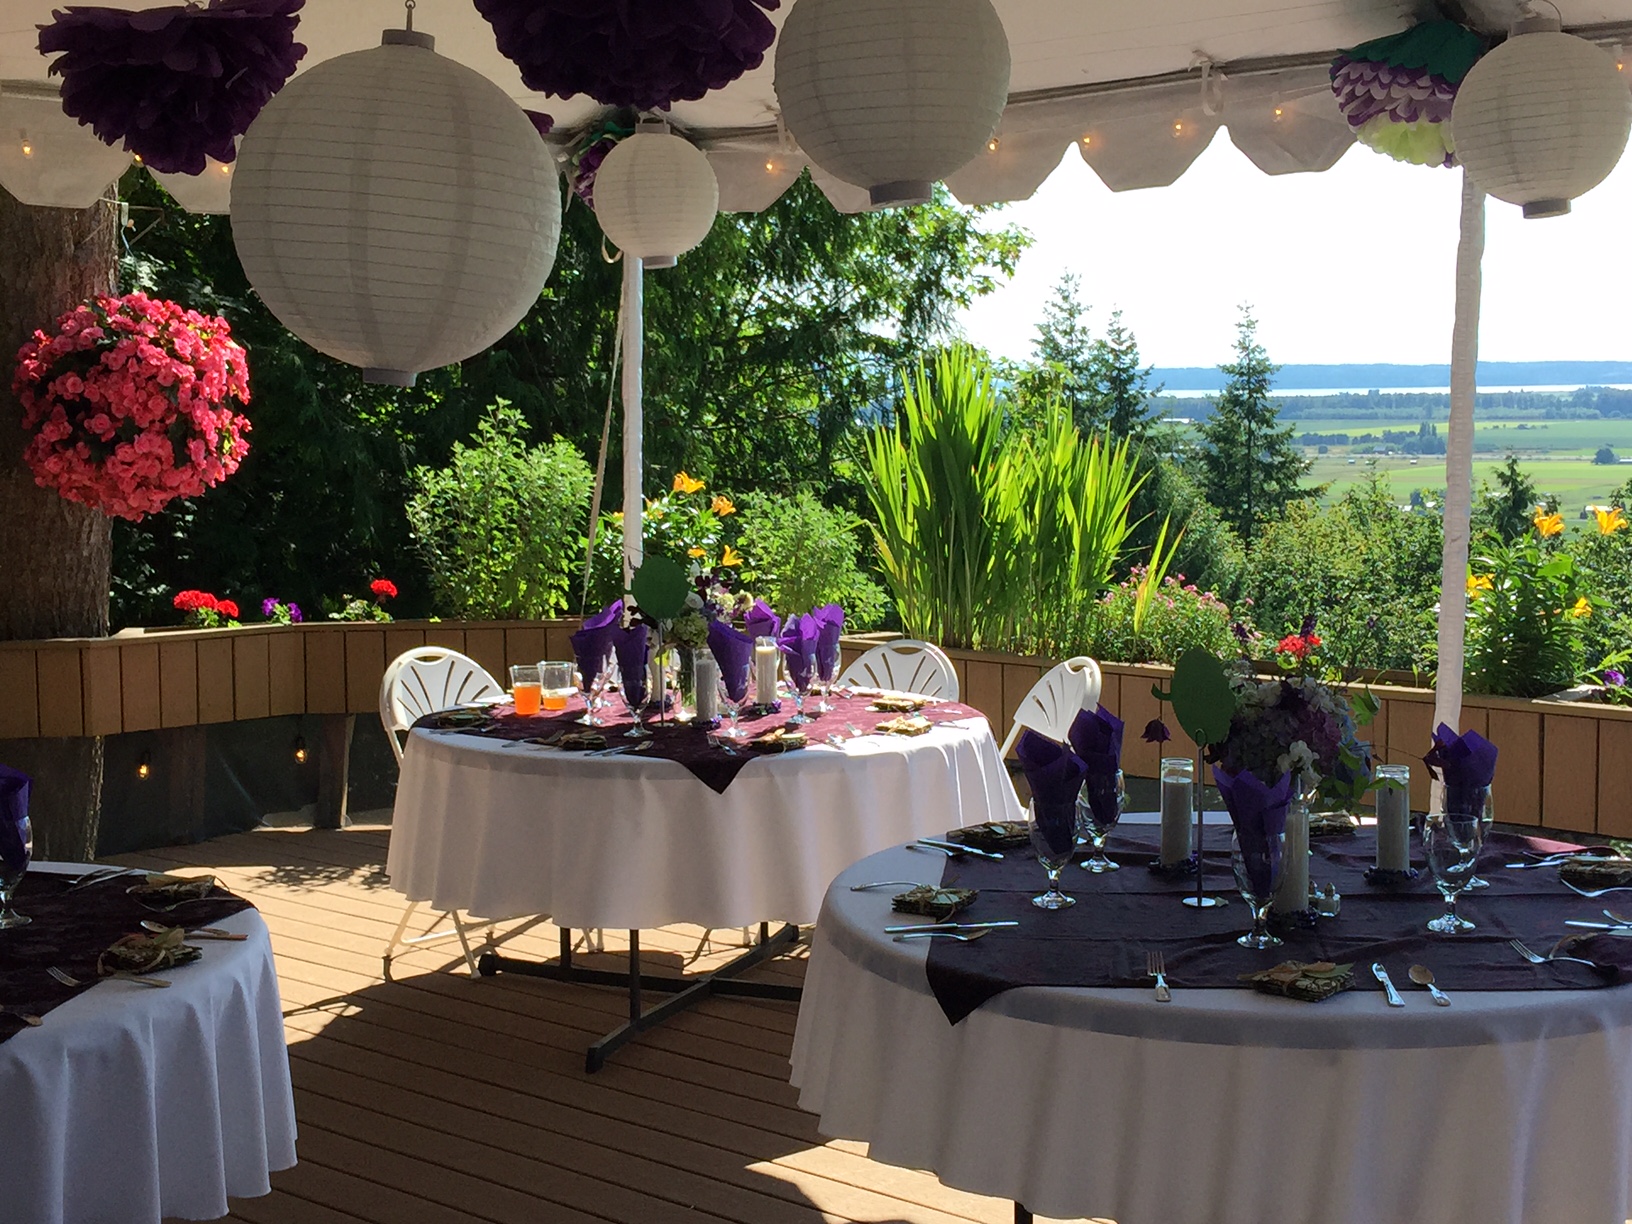 A table set up for an outdoor party